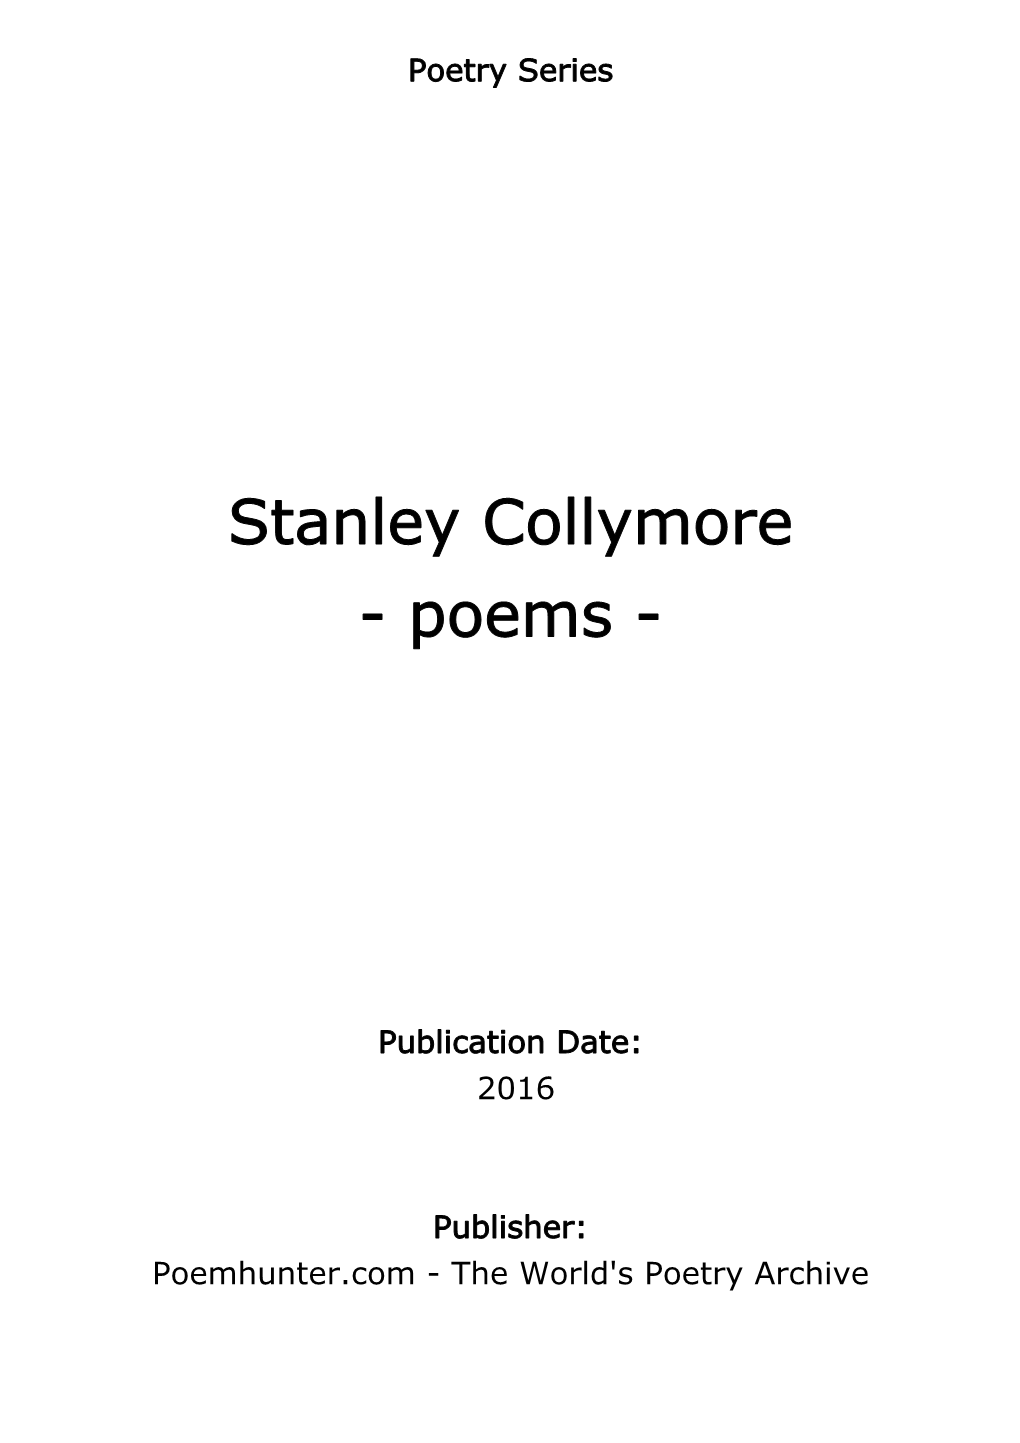 Stanley Collymore - Poems